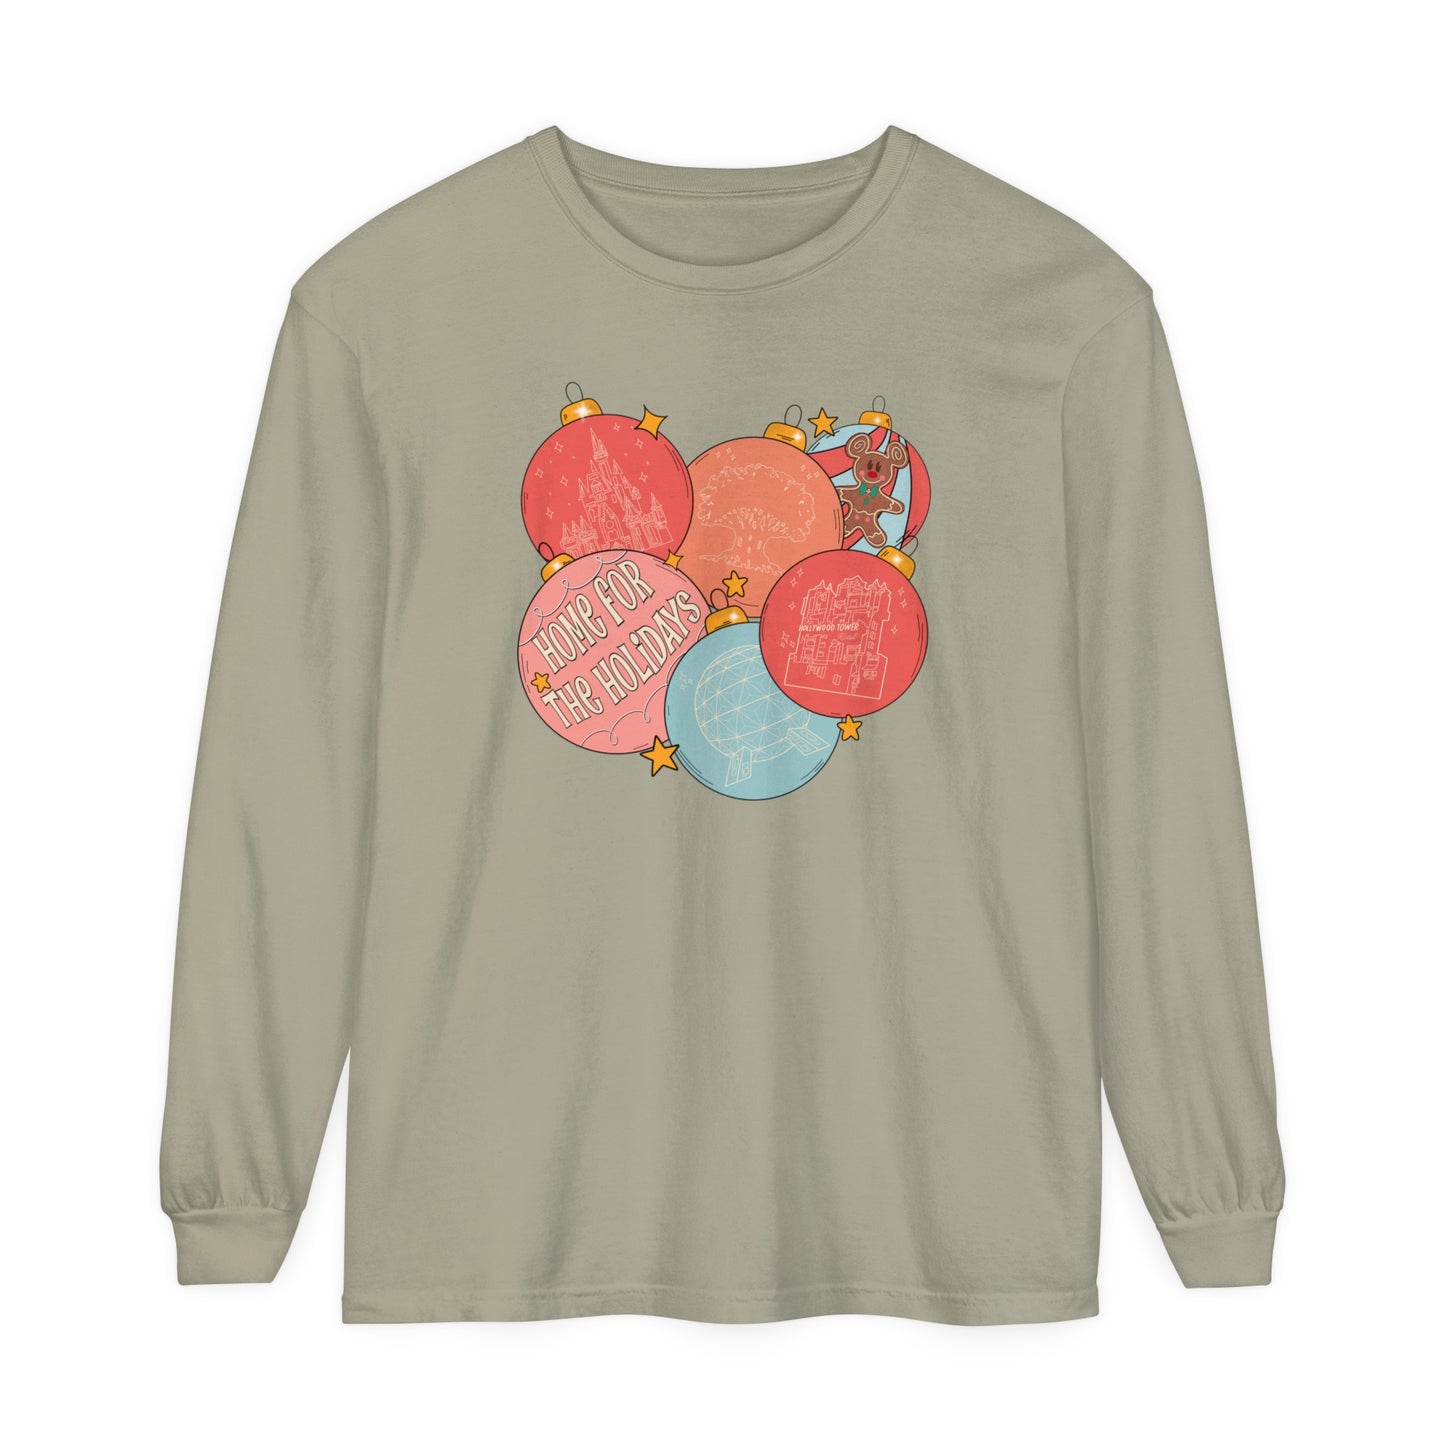 Home For The Holidays Garment-Dyed Long Sleeve T-Shirt